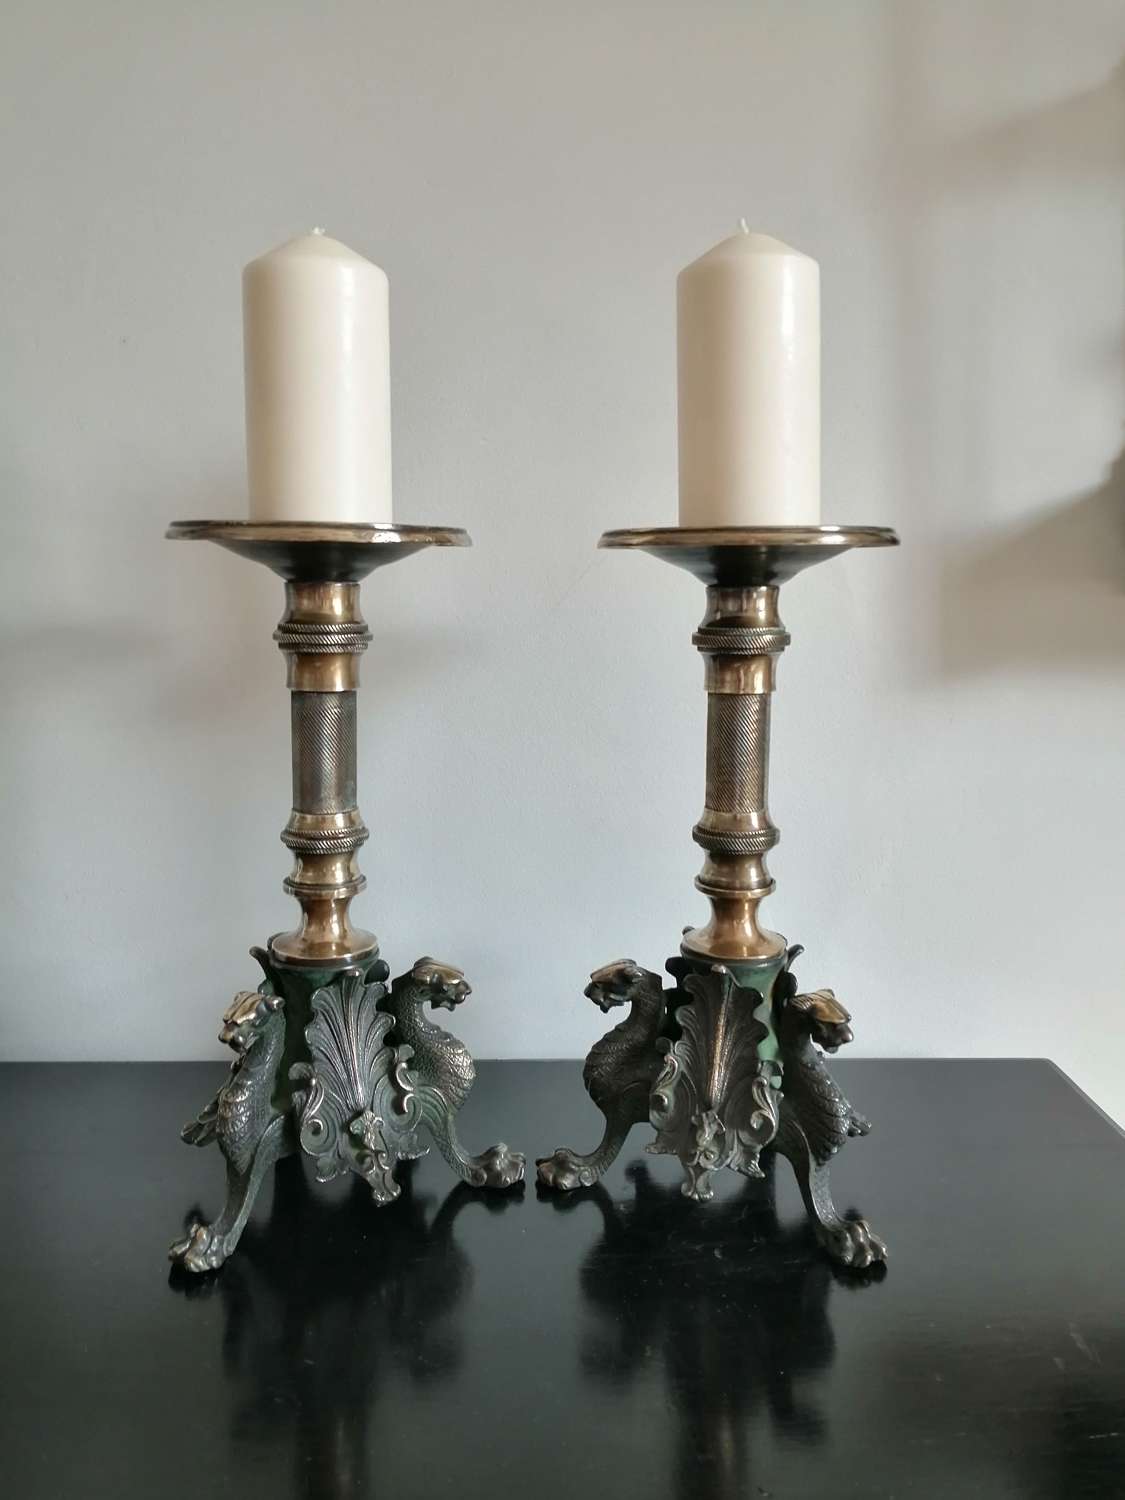 An excellent pair of Egyptian revival pricket candlesticks